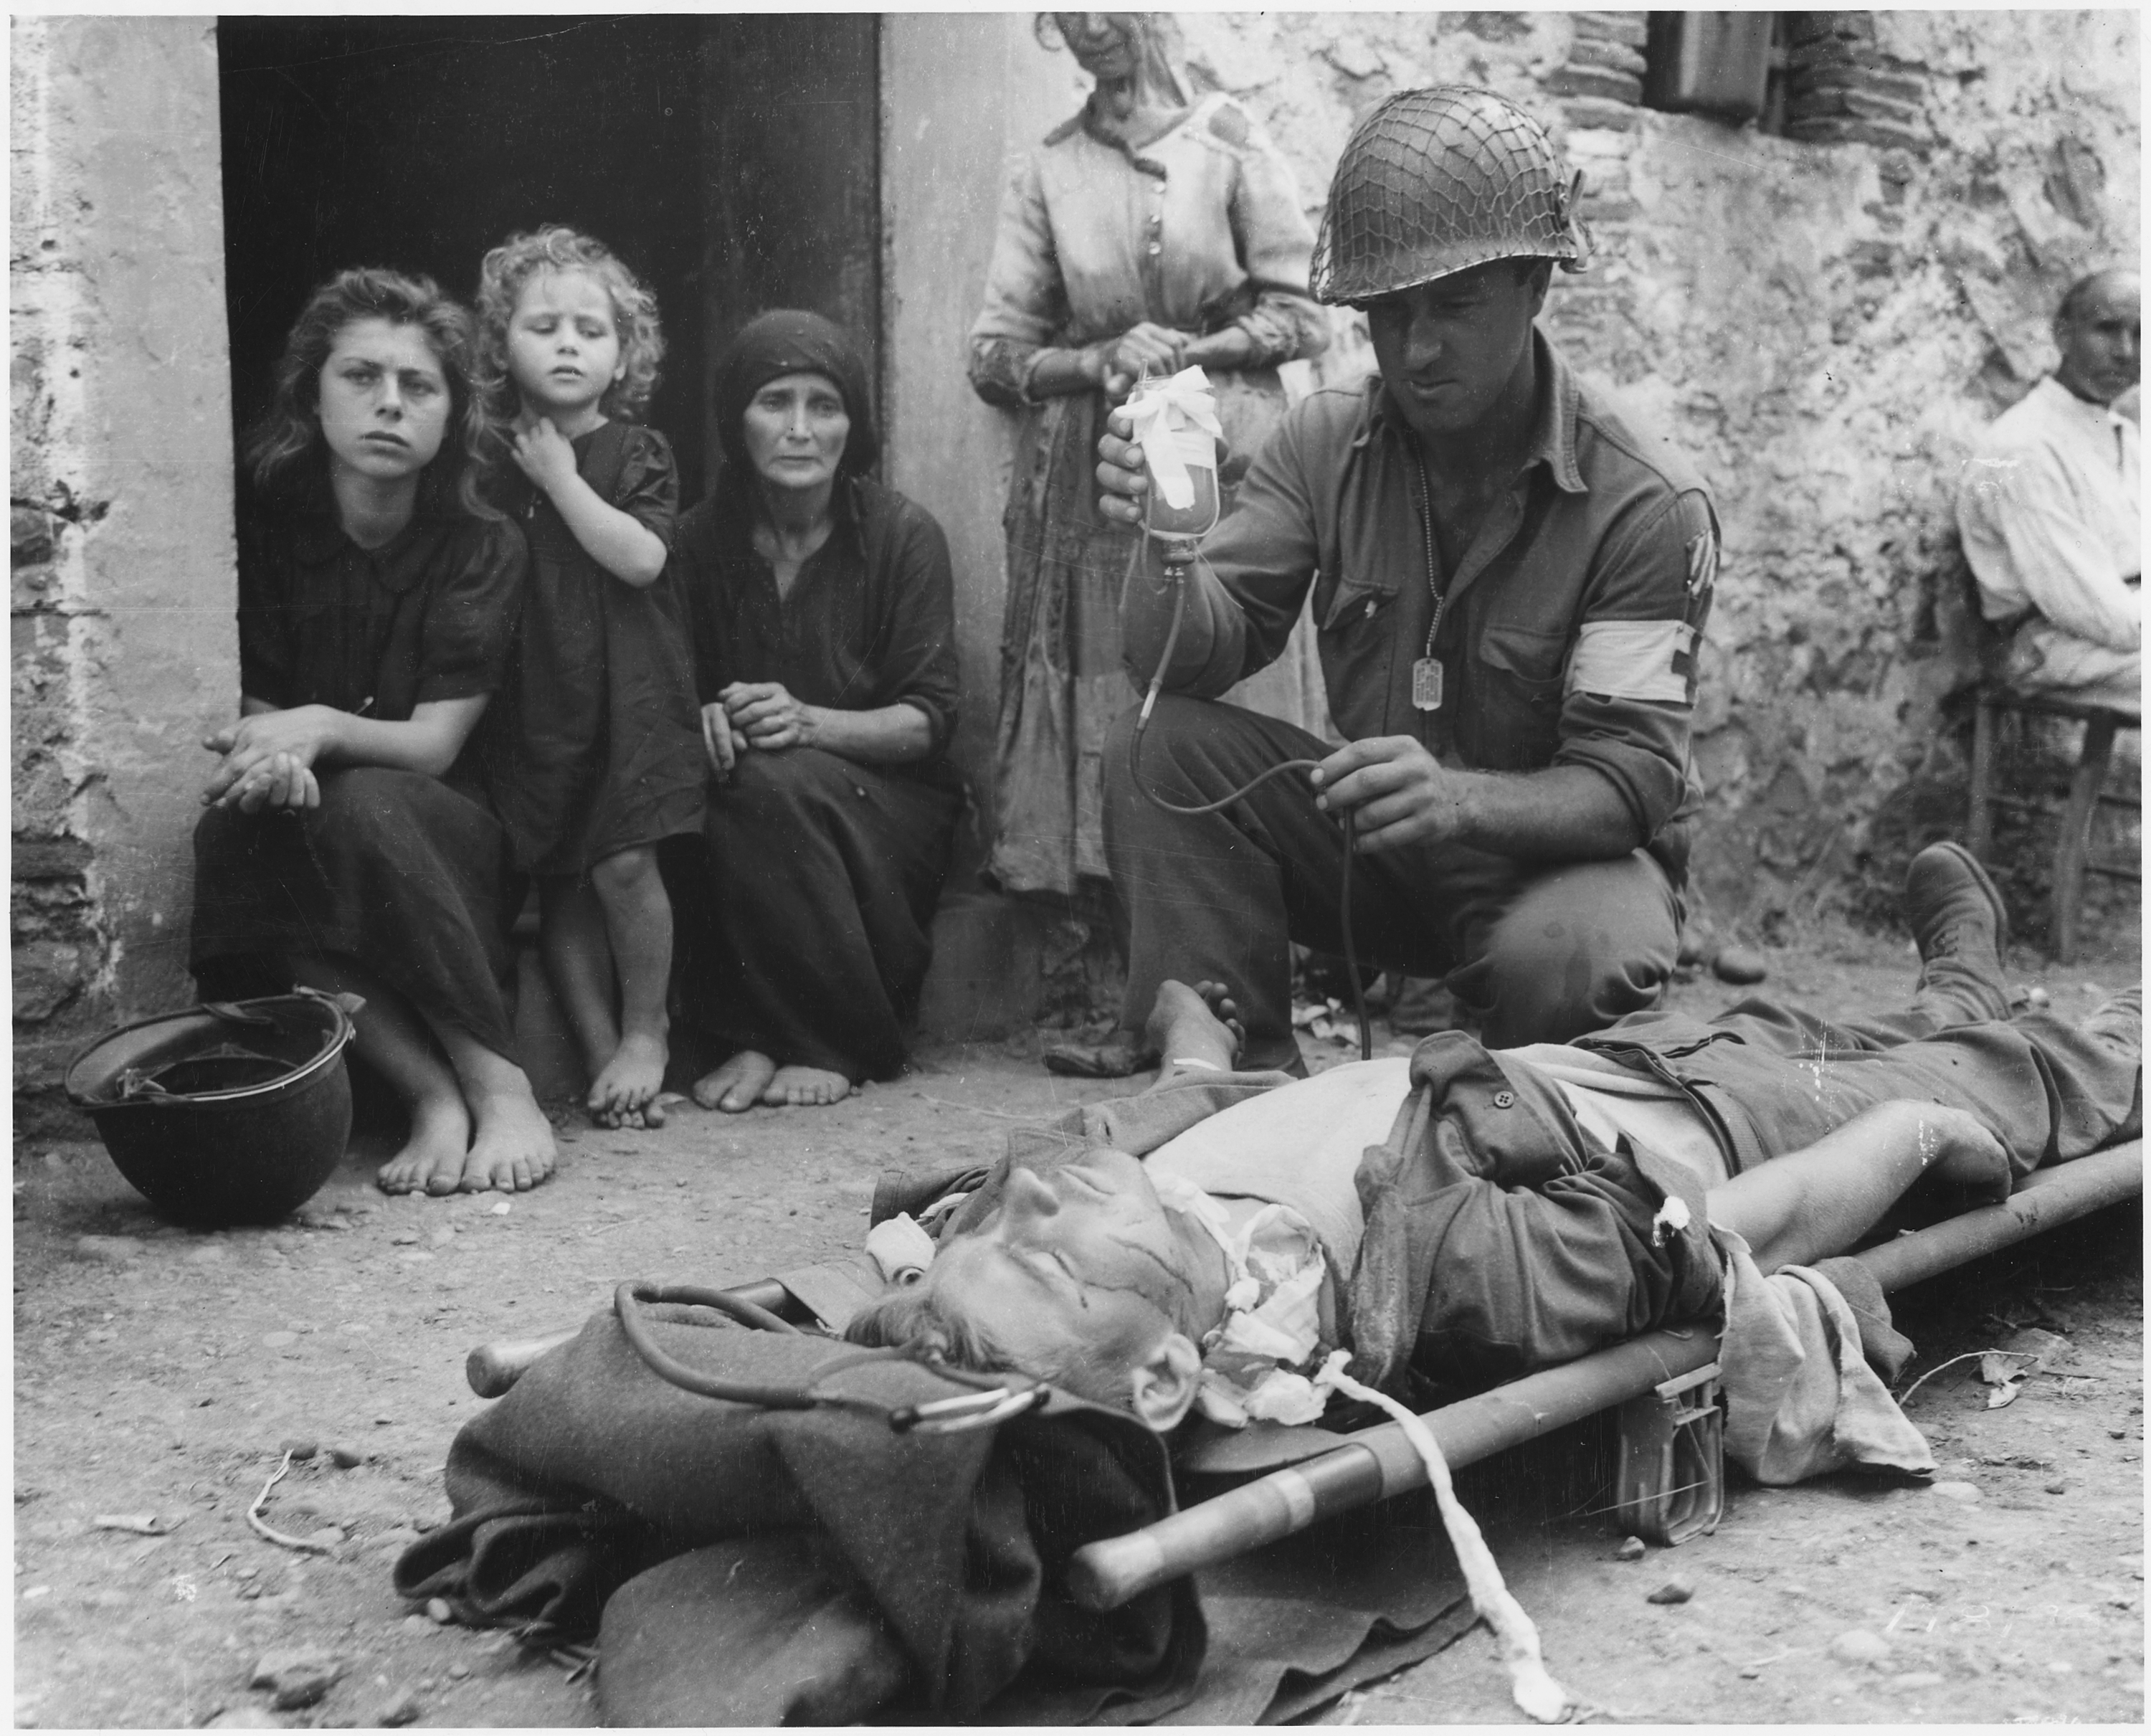 Private_Roy_W._Humphrey_of_Toledo%2C_Ohio_is_being_given_blood_plasma_after_he_was_wounded_by_shrapnel_in_Sicily_on_8-9-43_-_NARA_-_197268.jpg